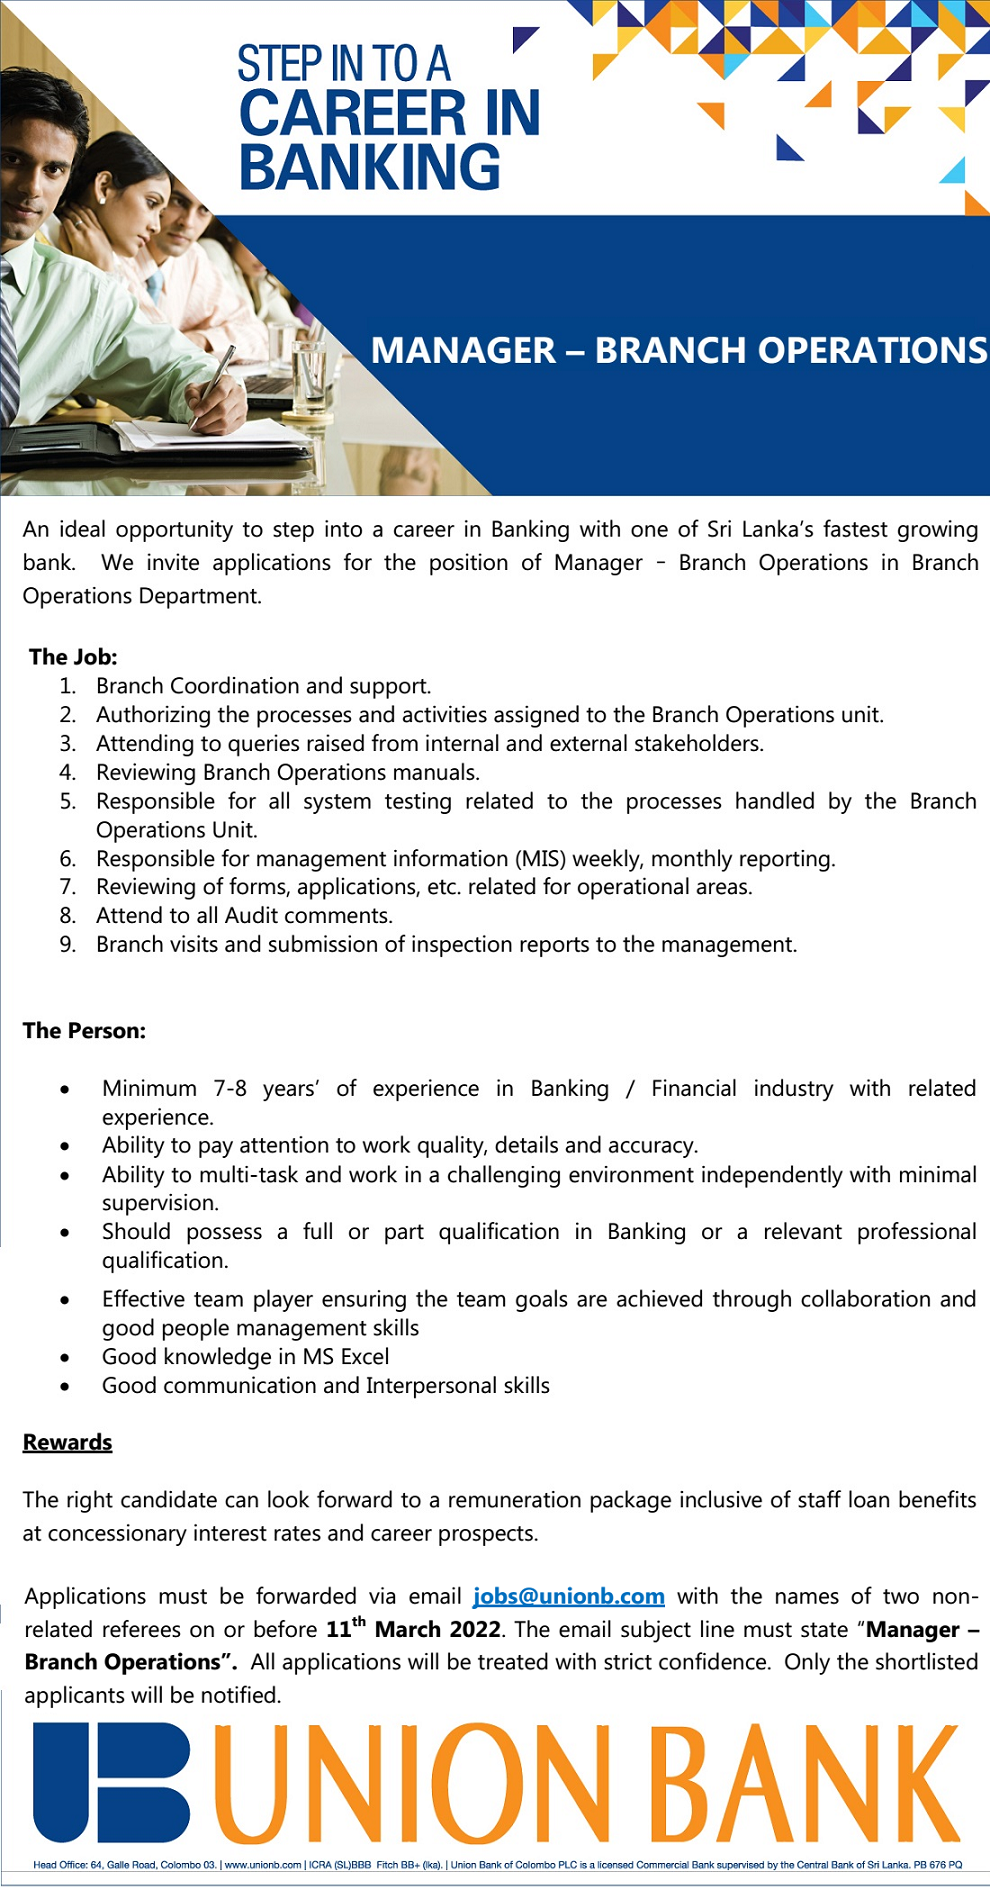 Manager of Branch Operation Vacancy in Union Bank Of Colombo PLC